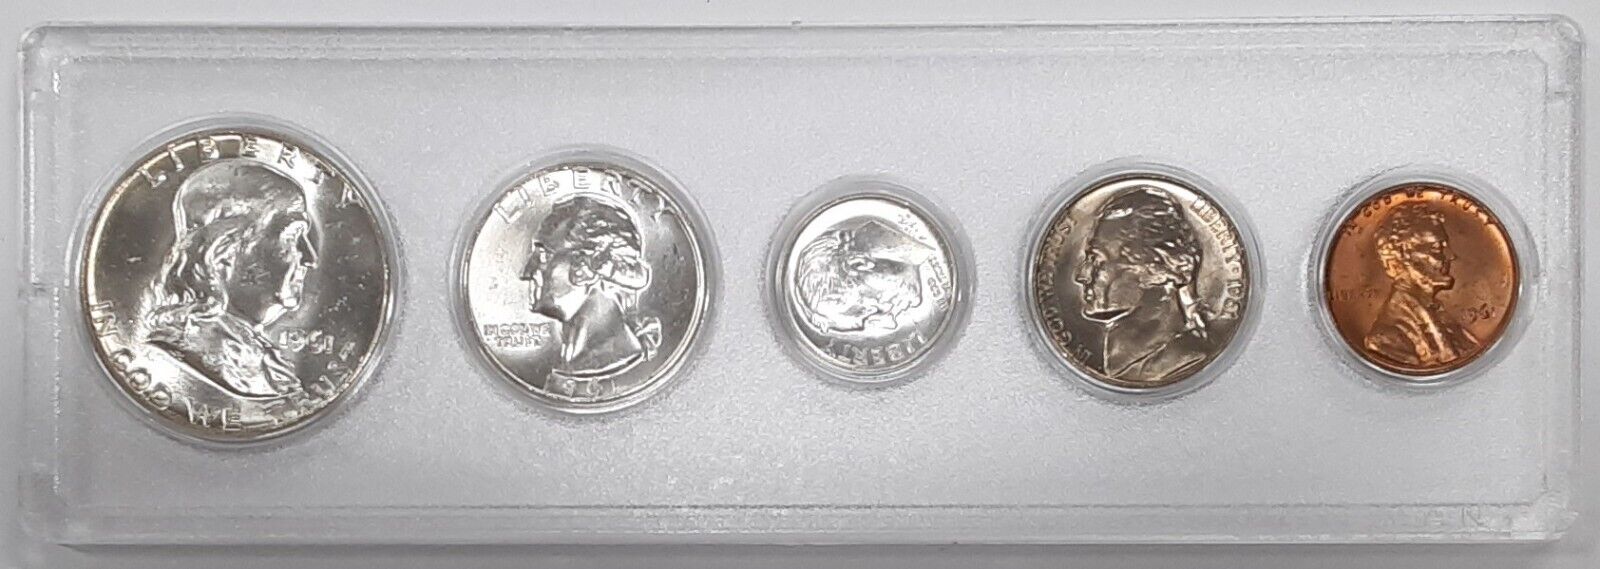 1961 US Uncirculated Year Set with Silver Half Quarter and Dime 5 Coins Total